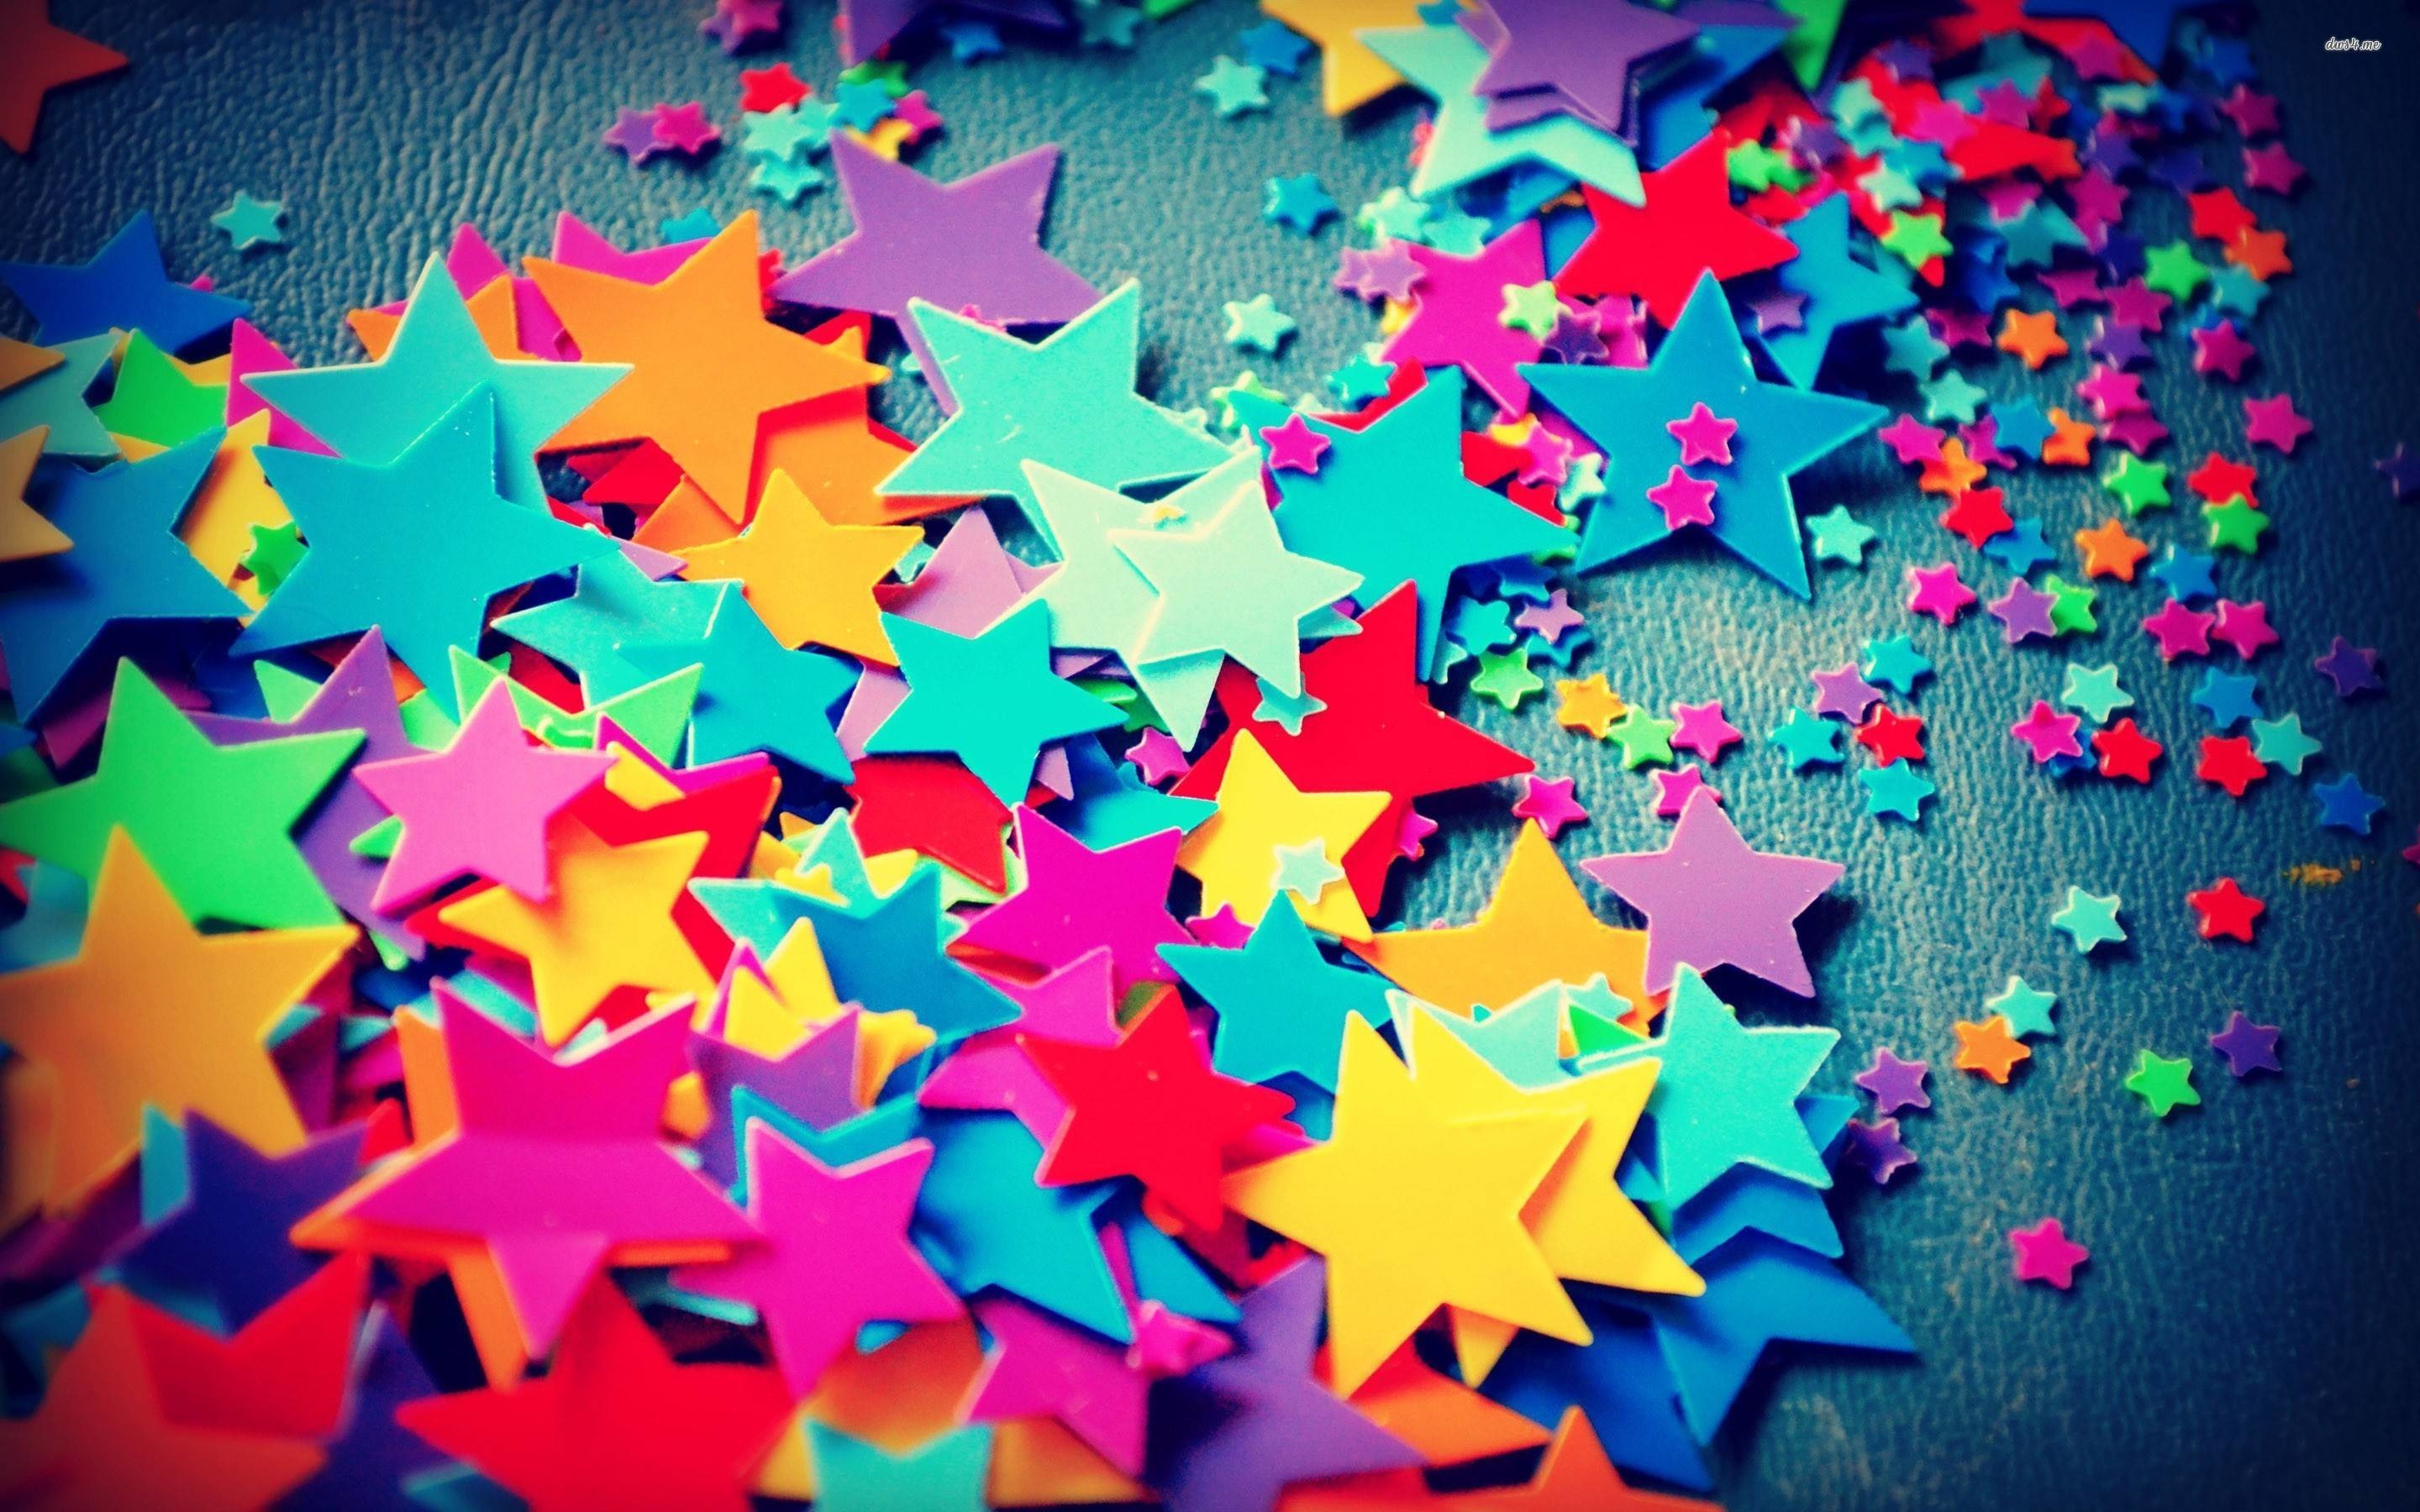 2880x1800 Colorful stars wallpaper - Photography wallpapers - #